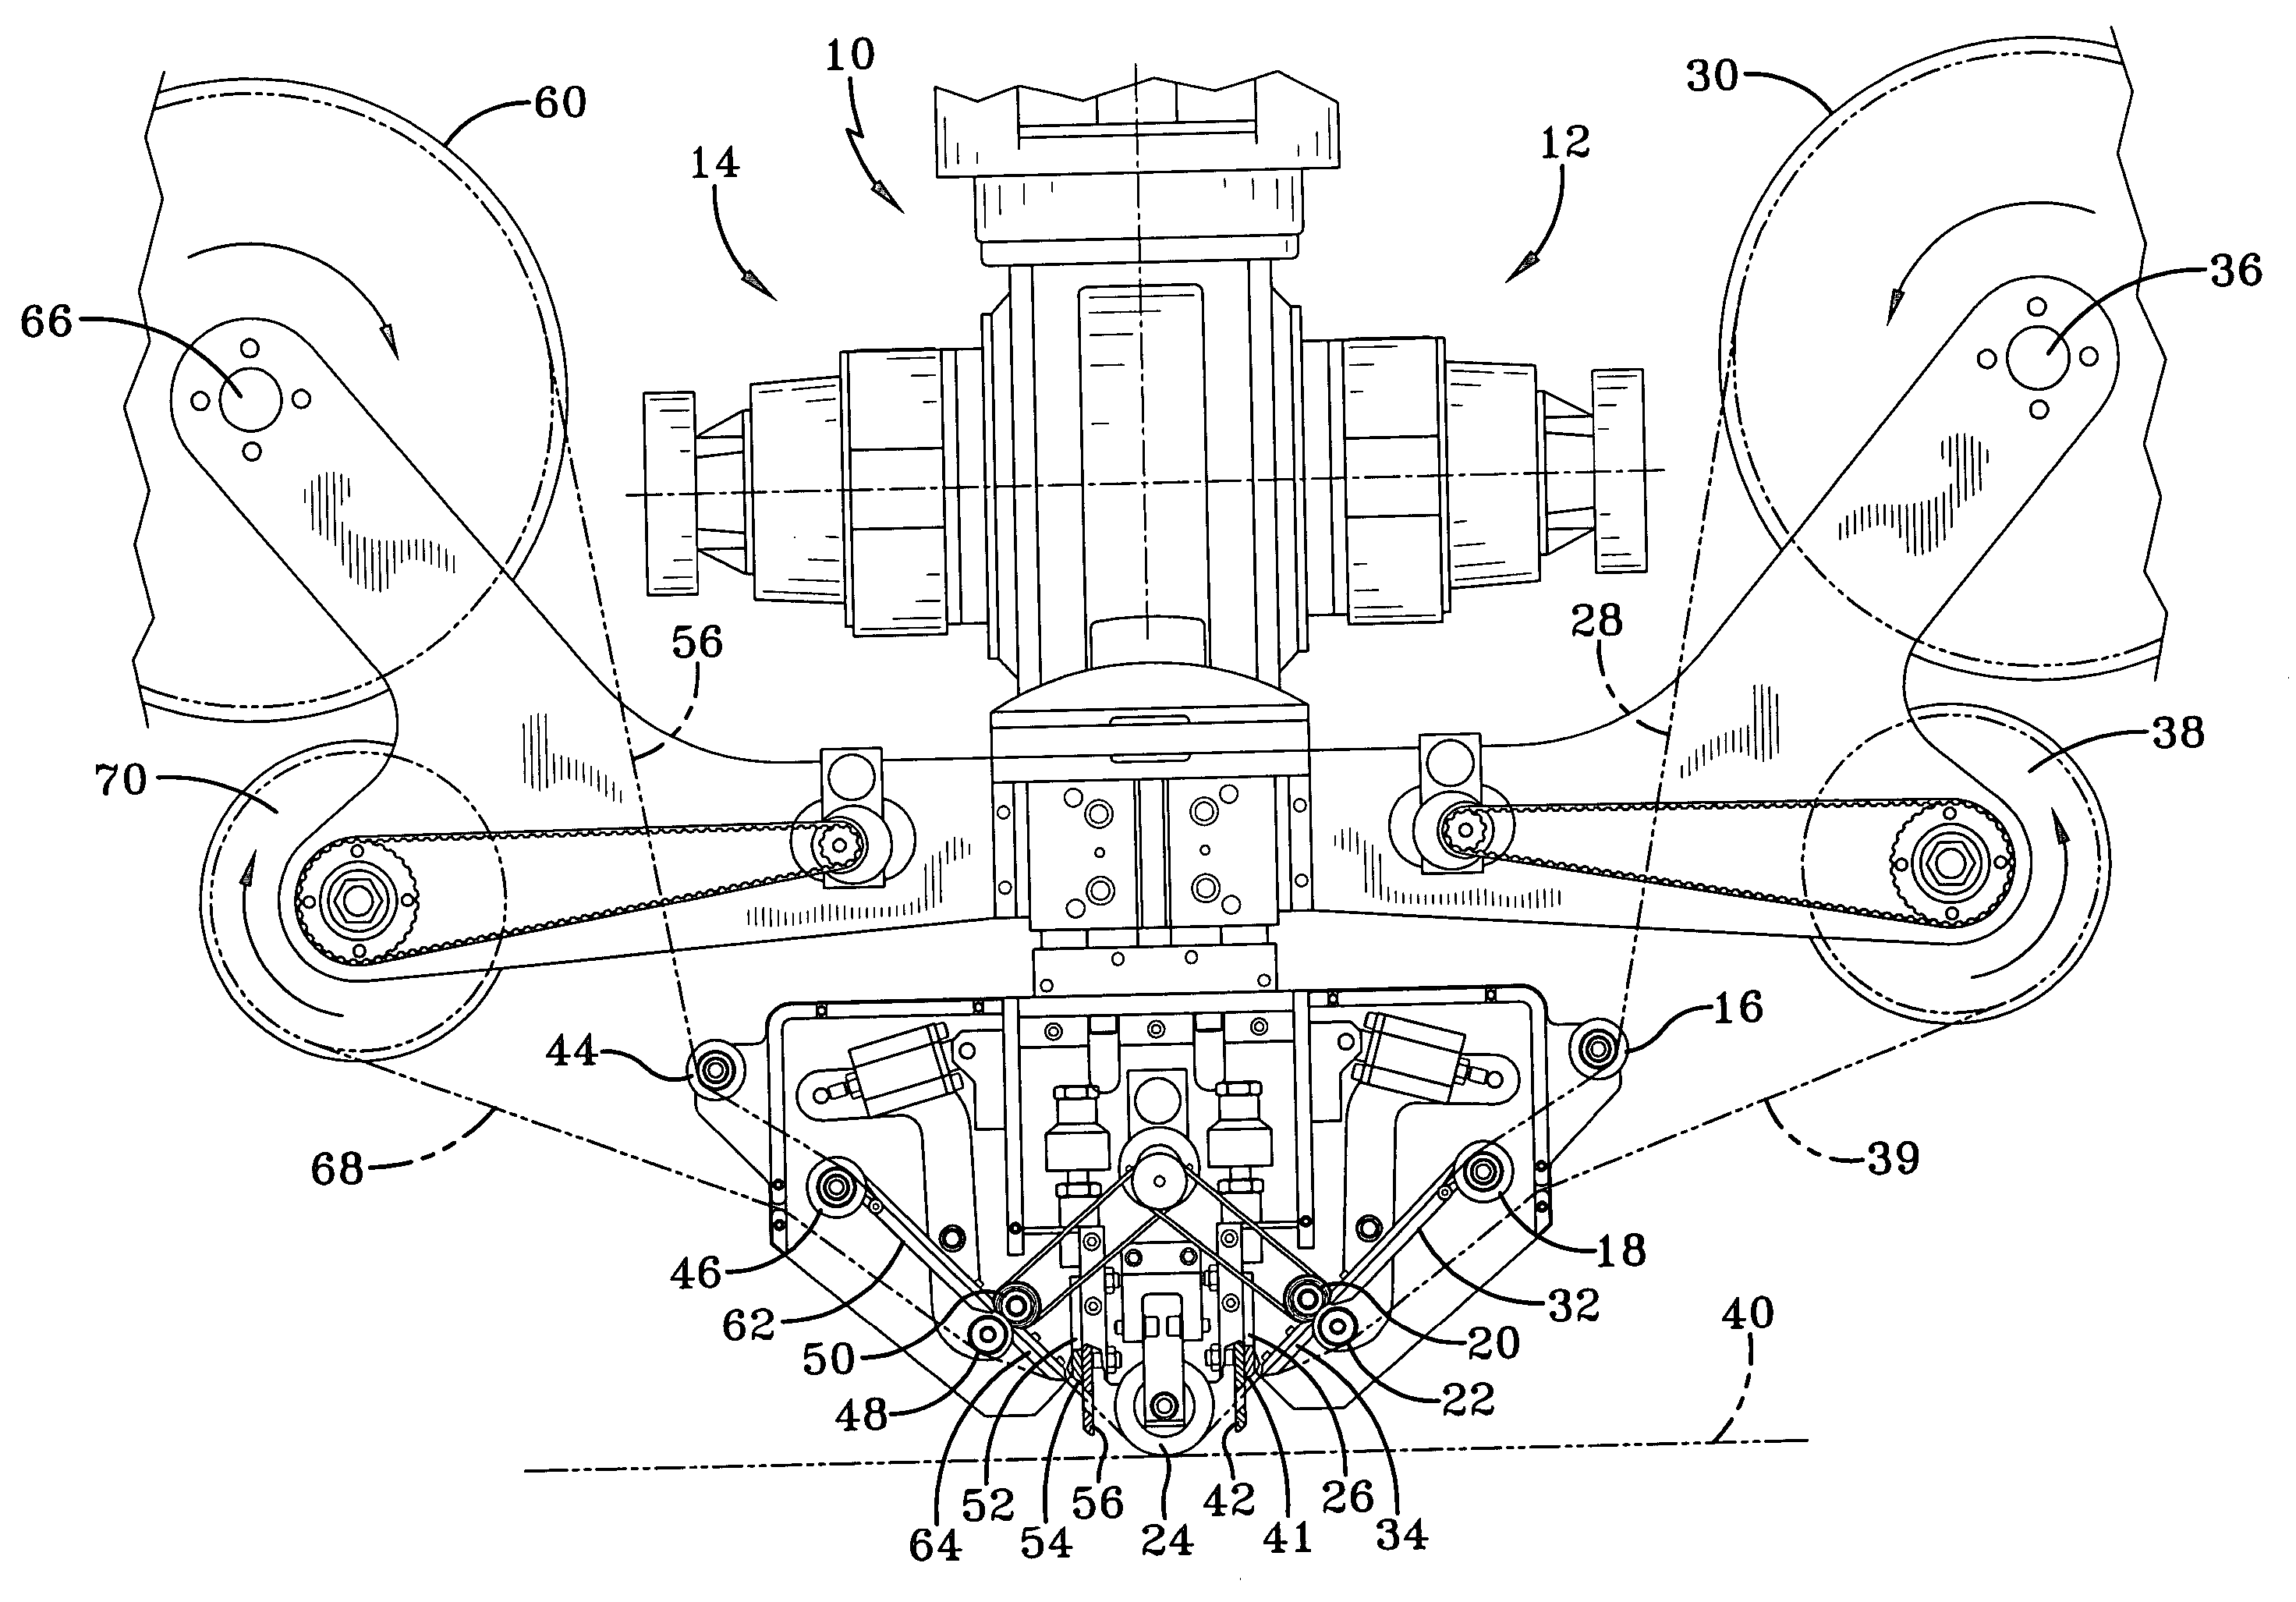 Multiple tape laying apparatus and method